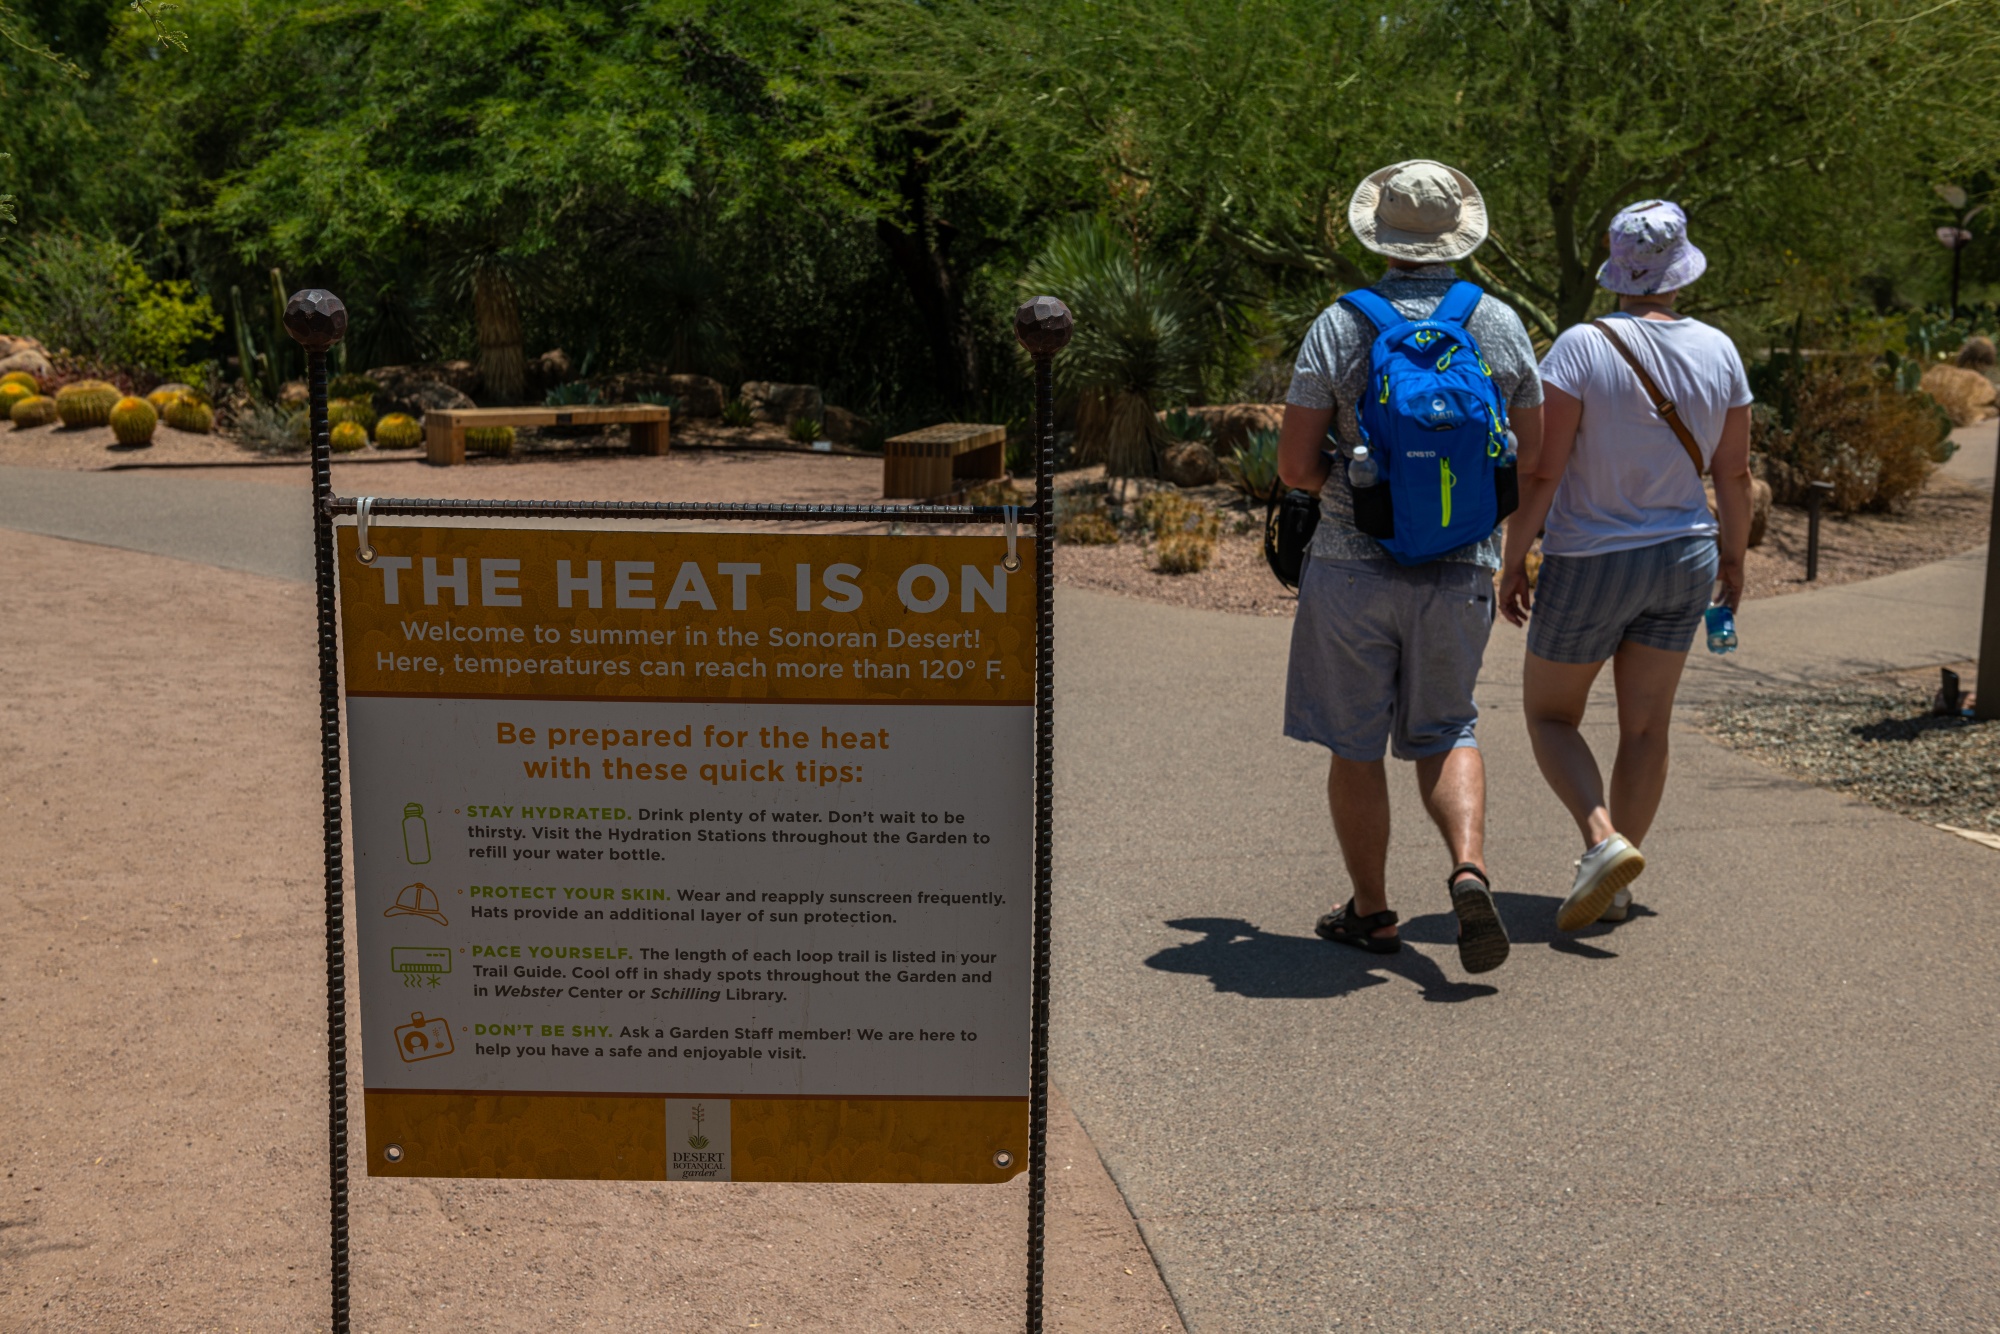 14 Tips on How to Stay Cool in the Heat 2023